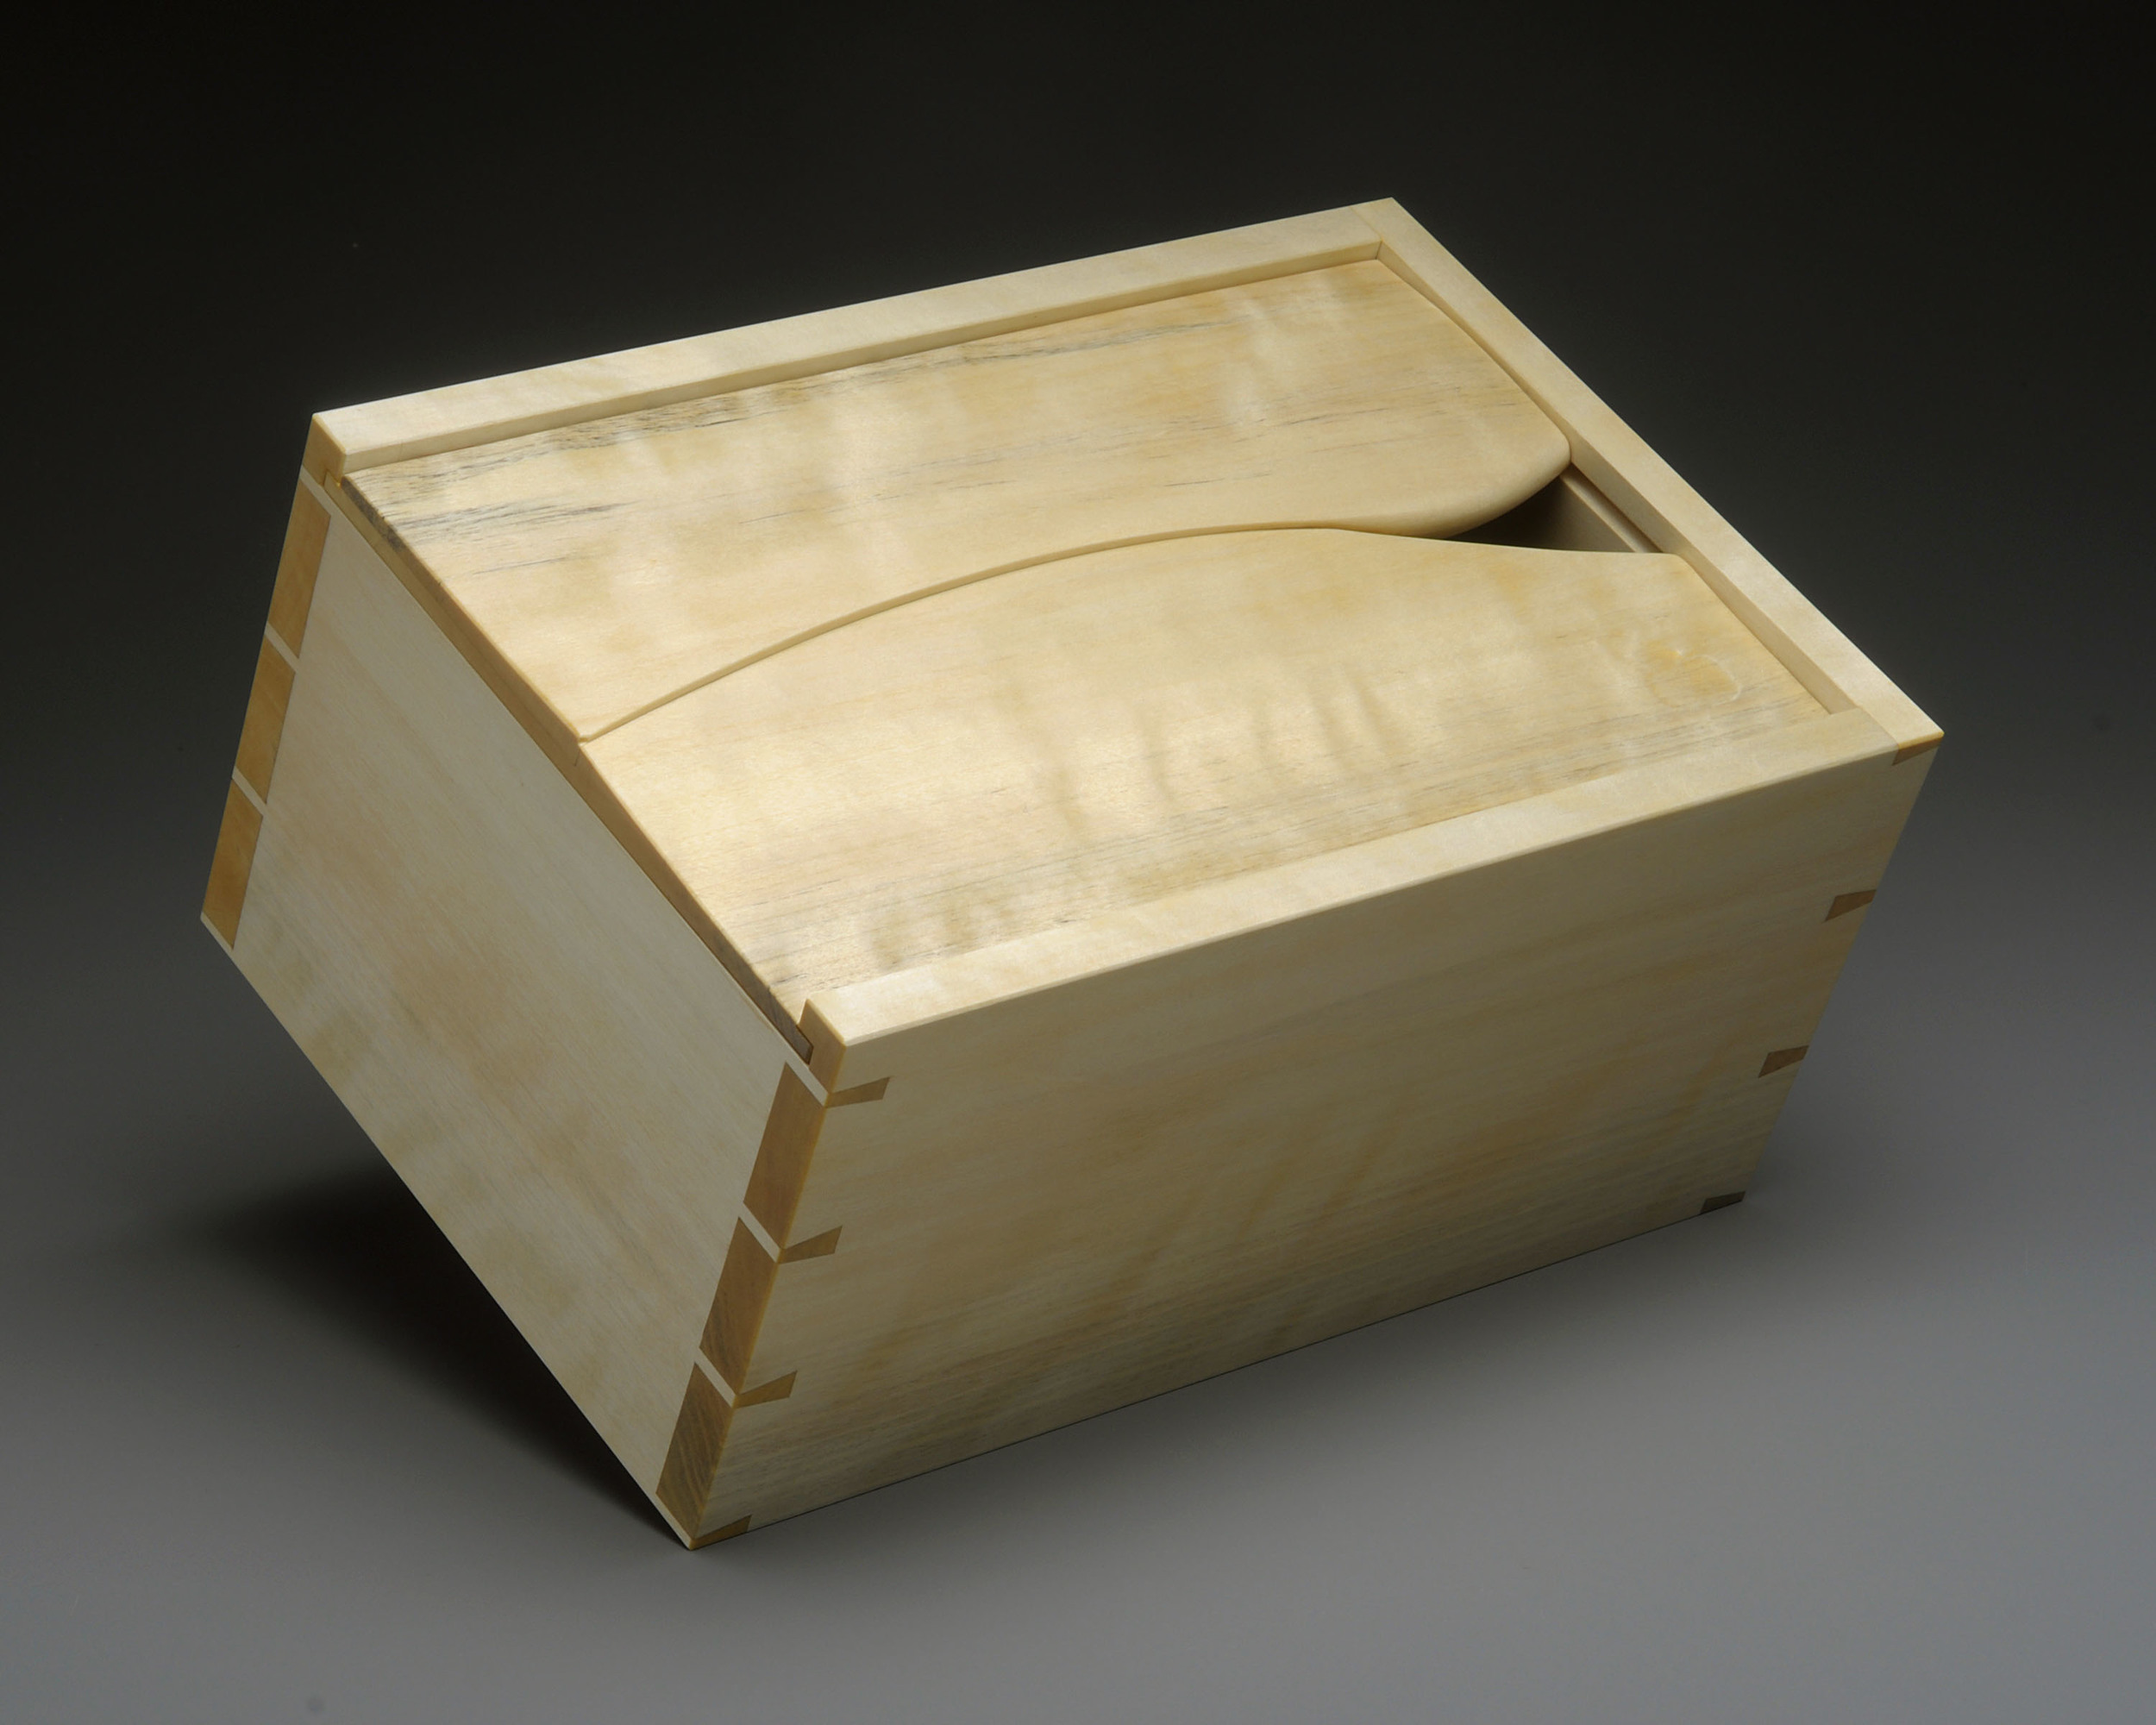  El Cubano   El Cubano? Well, someone suggested that the sculpted lid of this box makes it look like a fancy humidor. So I went with it and named it after a cigar. It is made of Yellow Birch, with a touch of flame figure.    7.5" W x 11" L x 5" D    